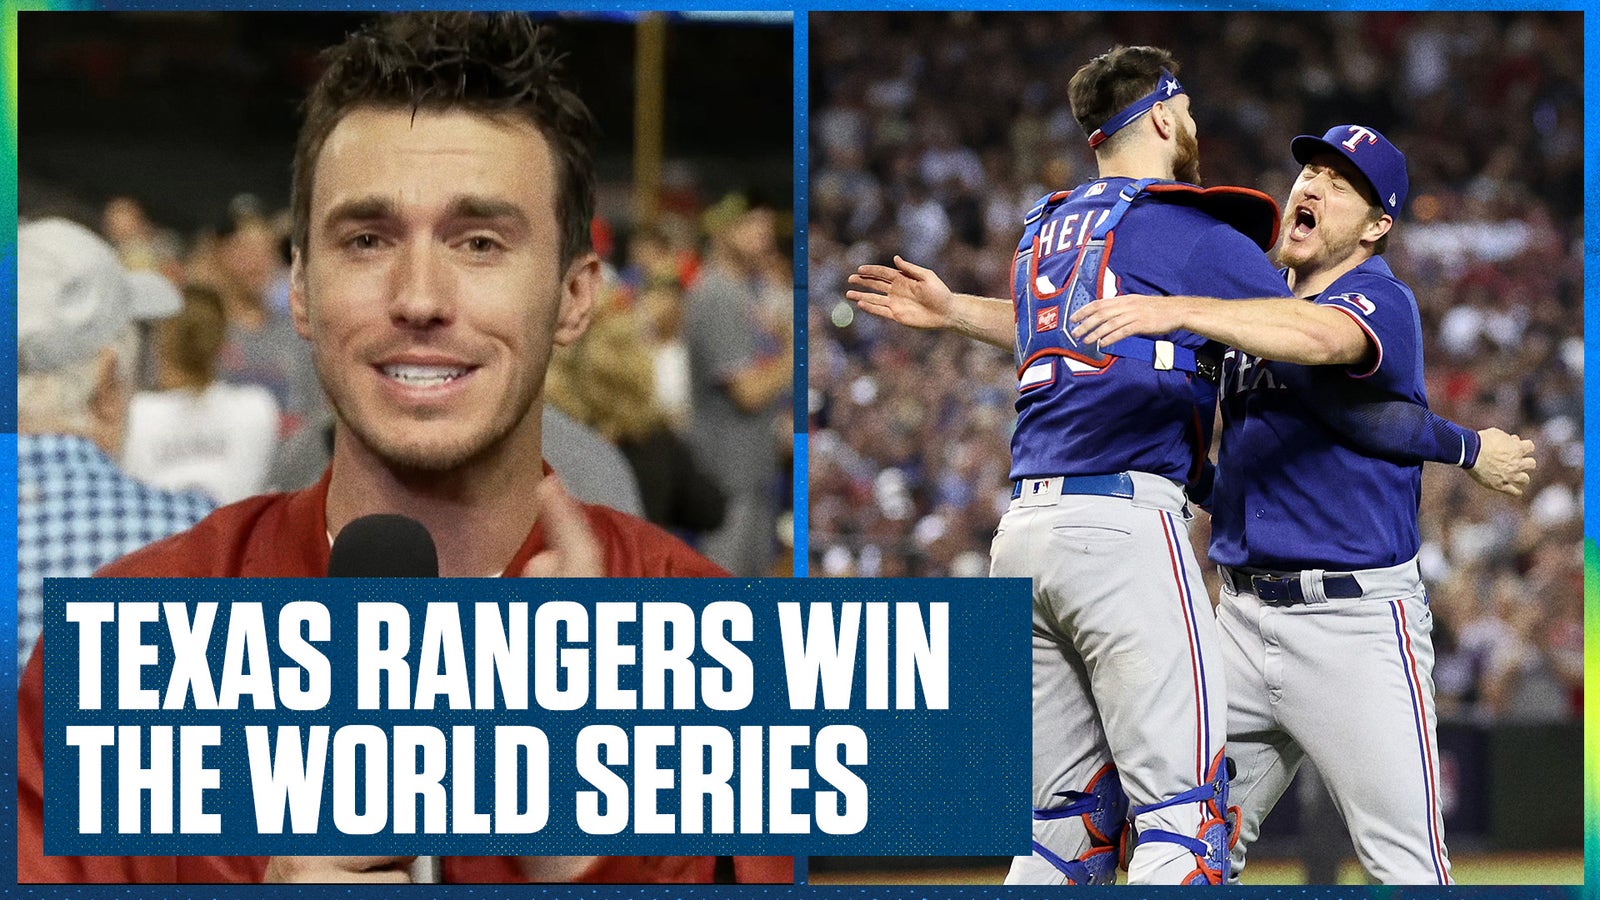 Texas Rangers are World Series champs for the first time